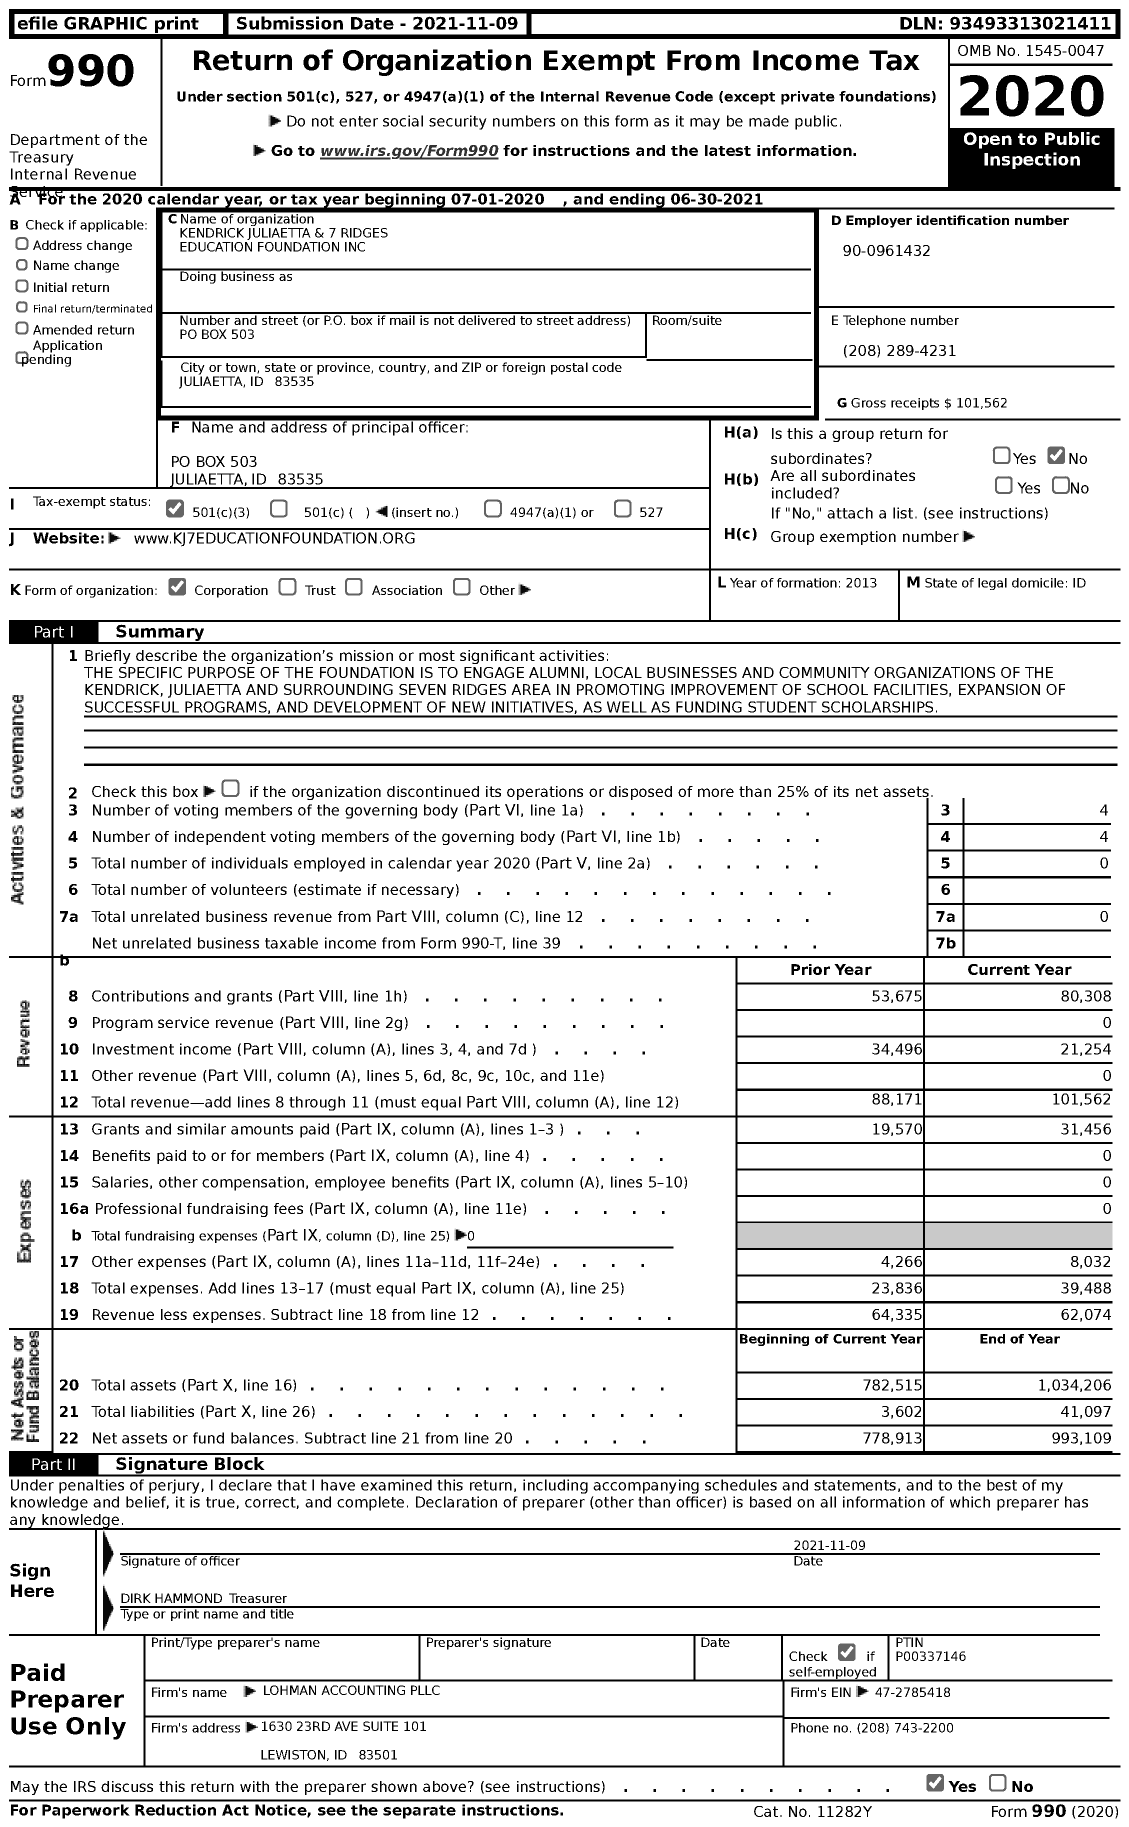 Image of first page of 2020 Form 990 for Kendrick Juliaetta and 7 Ridges Education Foundation